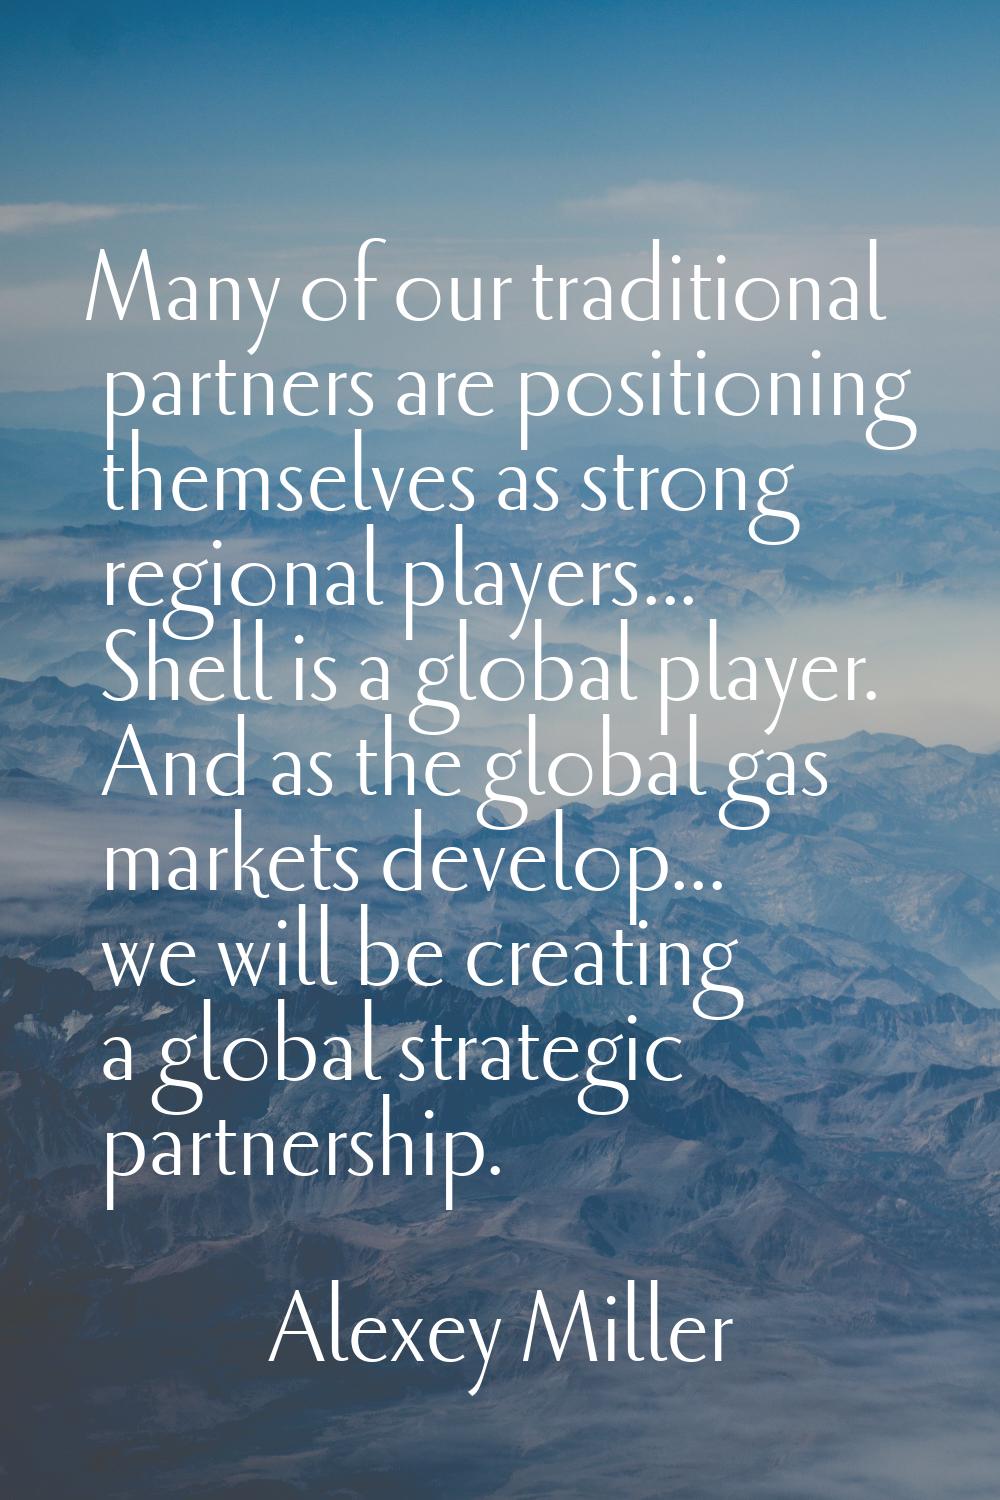 Many of our traditional partners are positioning themselves as strong regional players... Shell is 